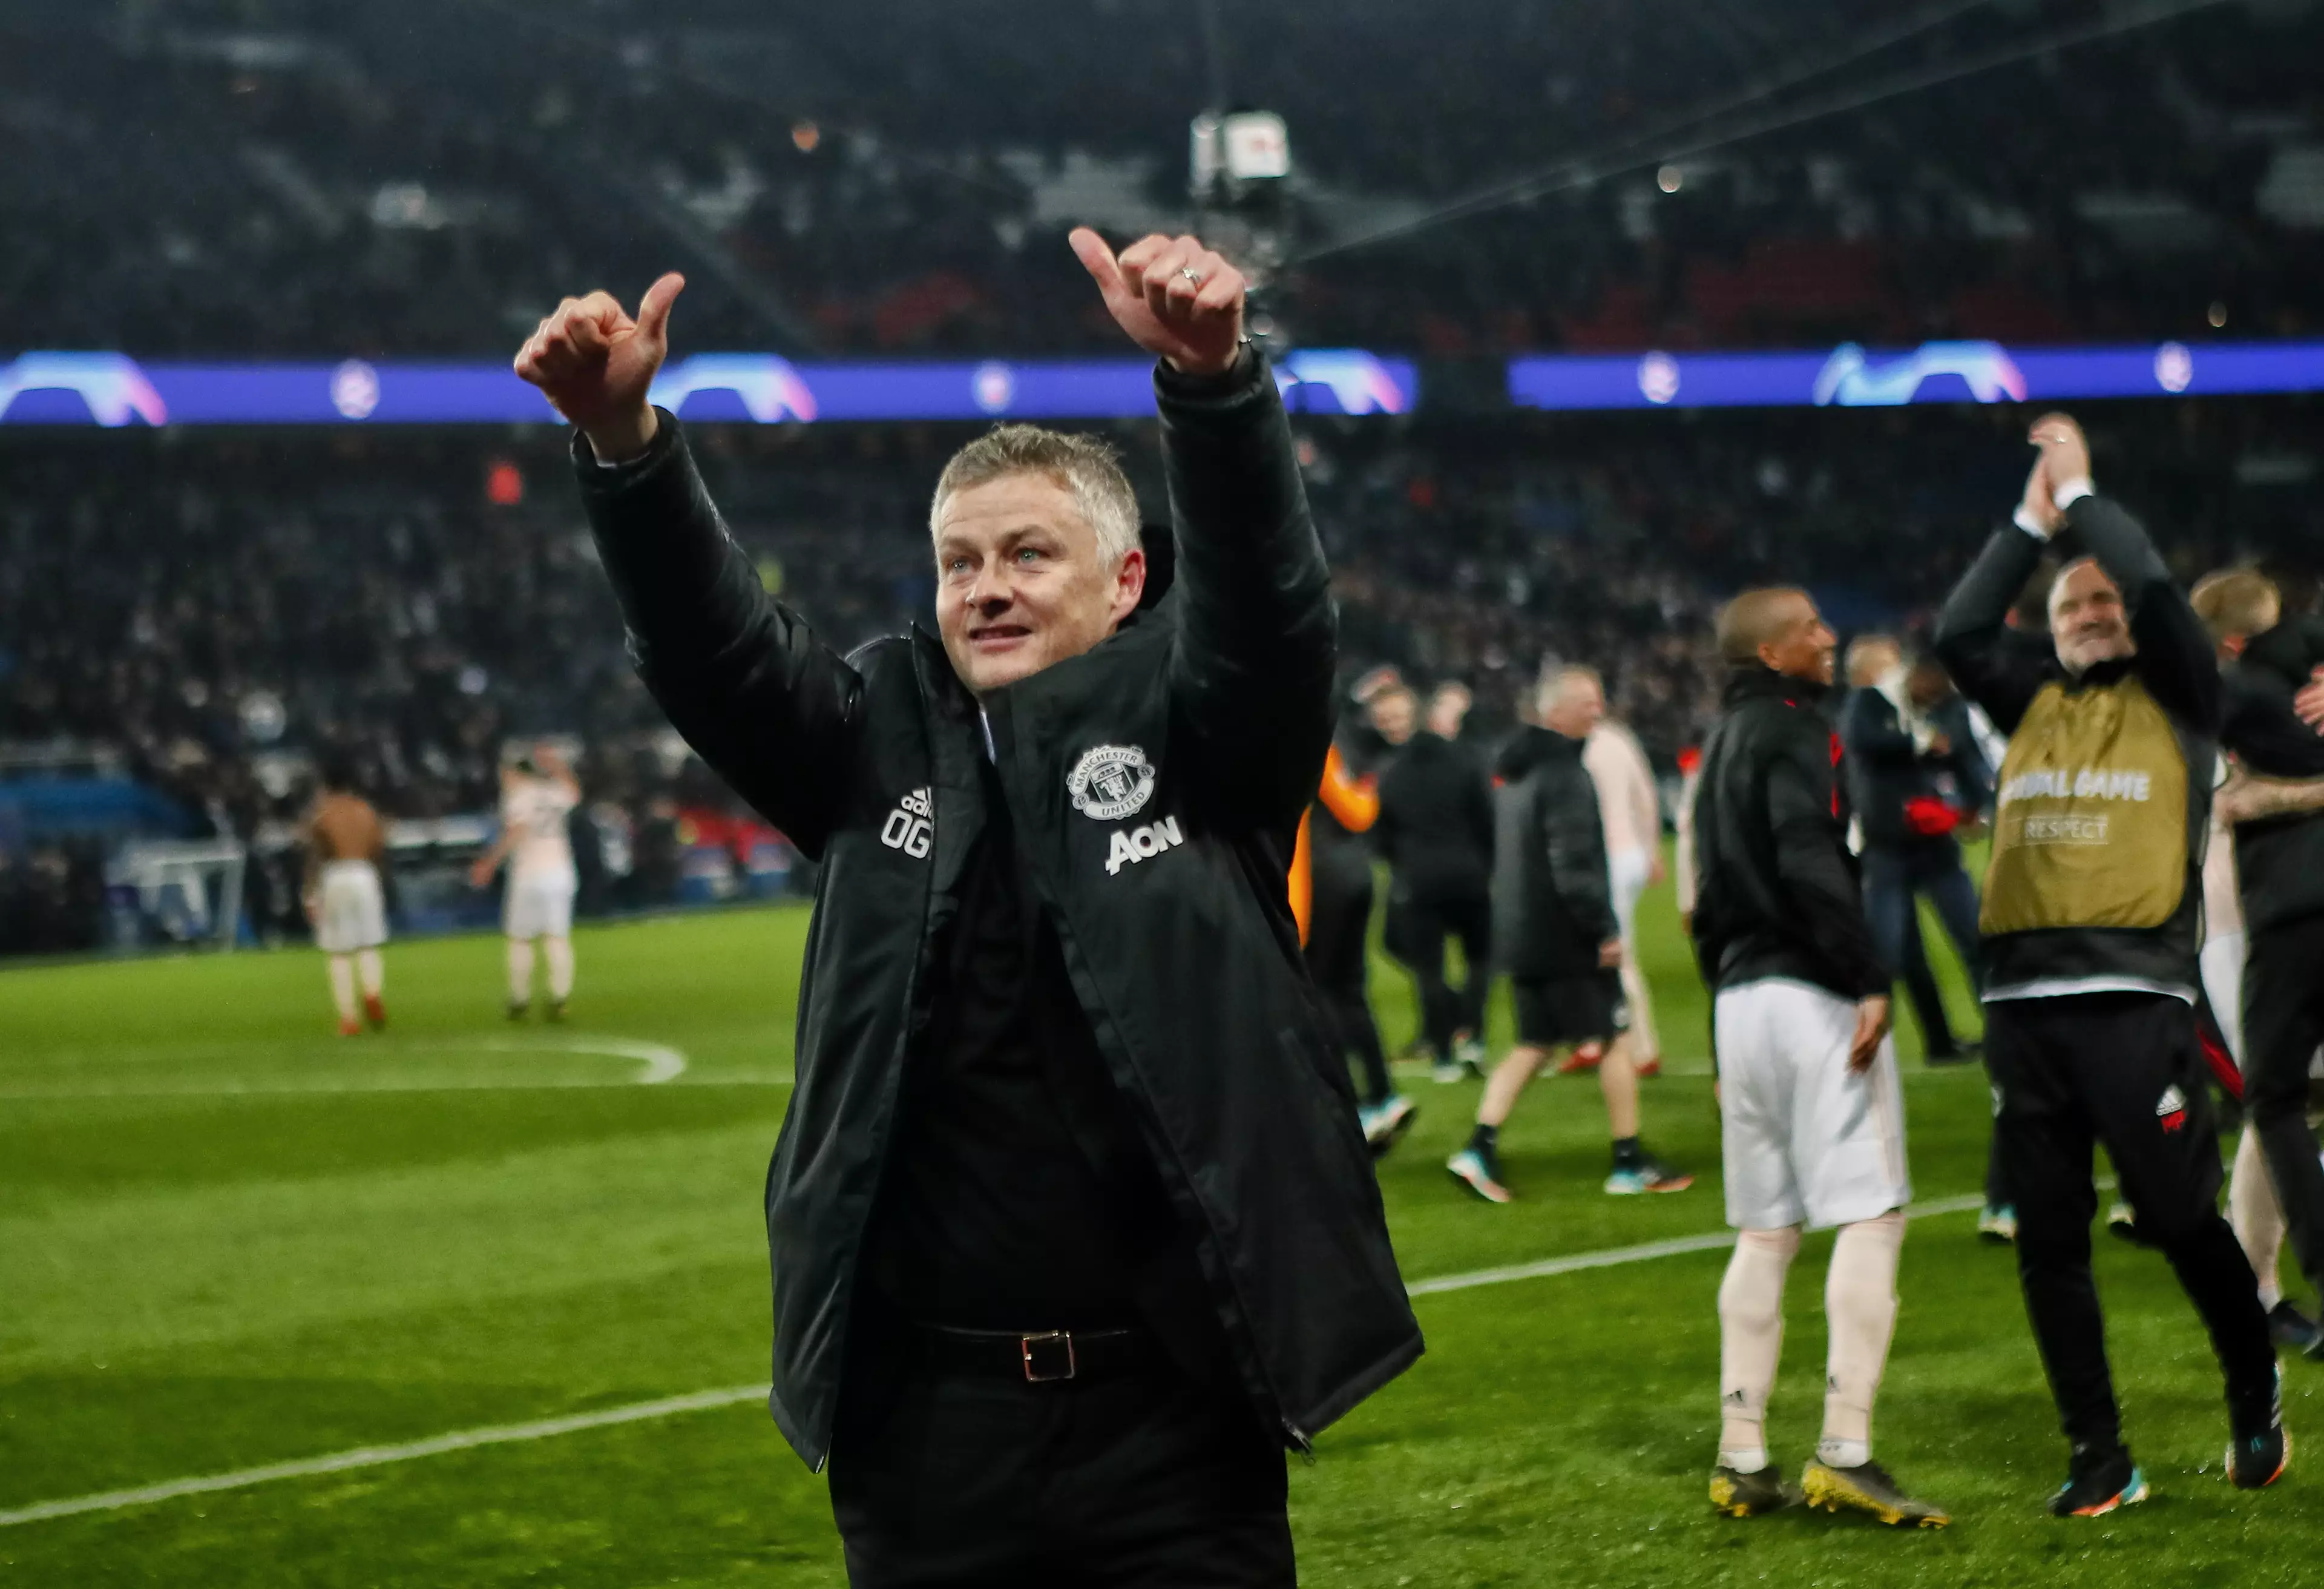 United's win over PSG was likely a big factor in Solskjaer getting the job. Image: PA Images